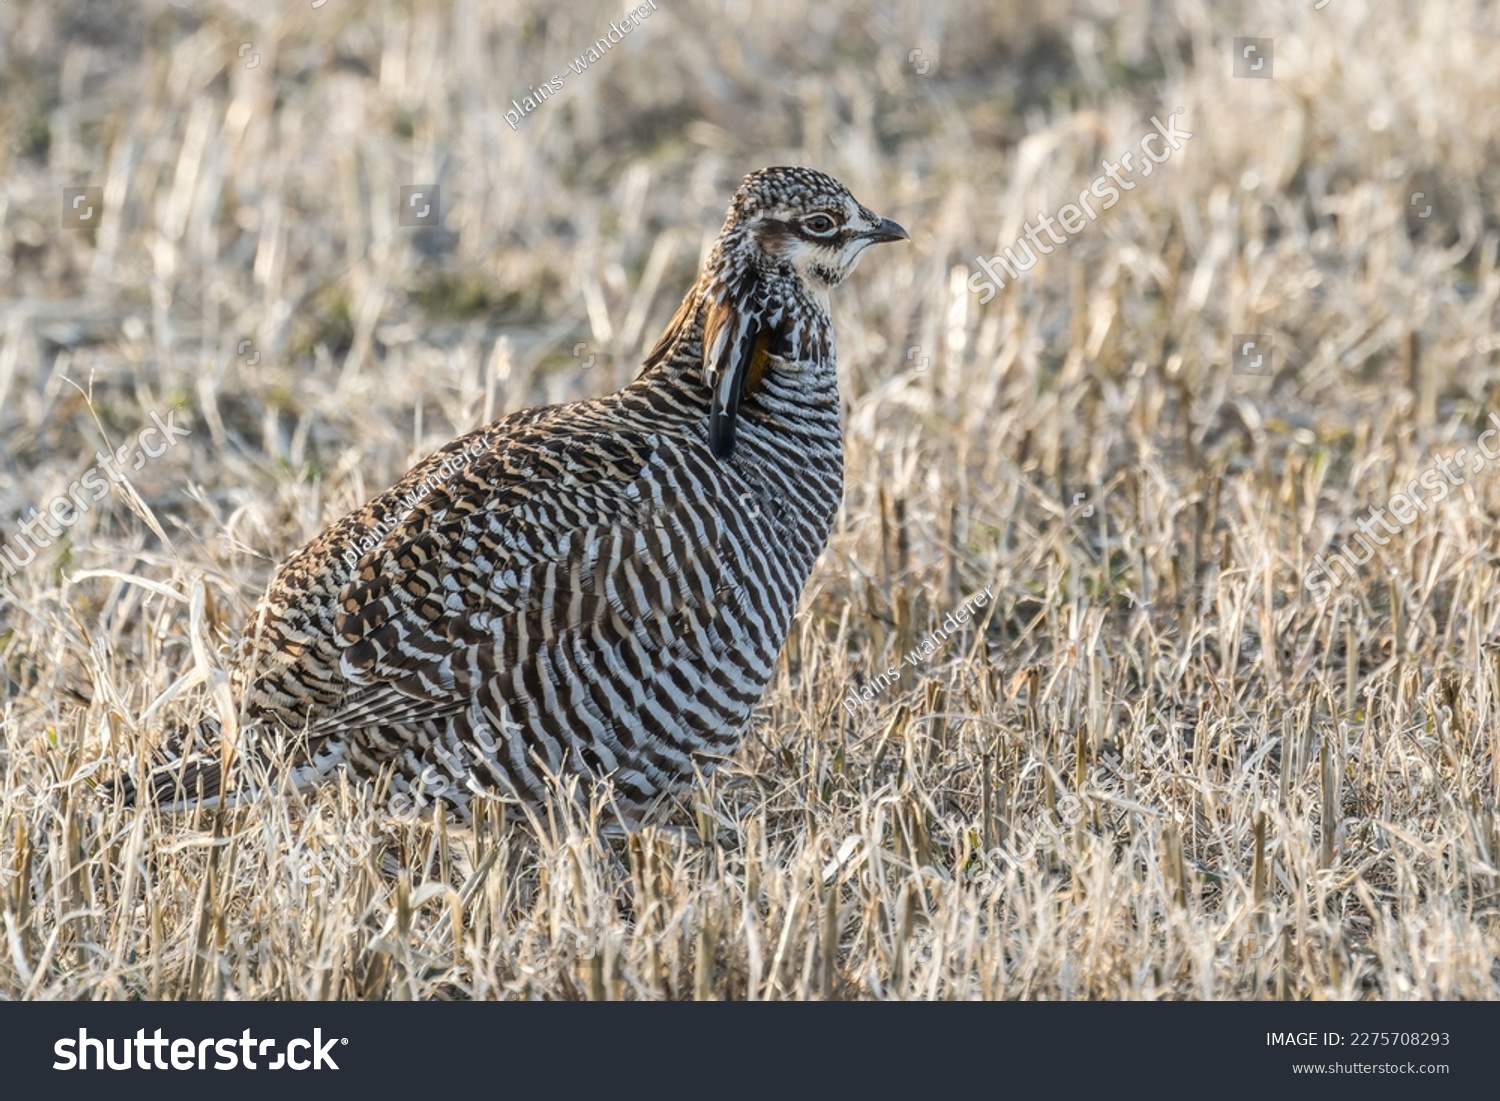 An adorable Greater Prairie-chicken Tympanuchus cupido resting among grass stubbles #2275708293